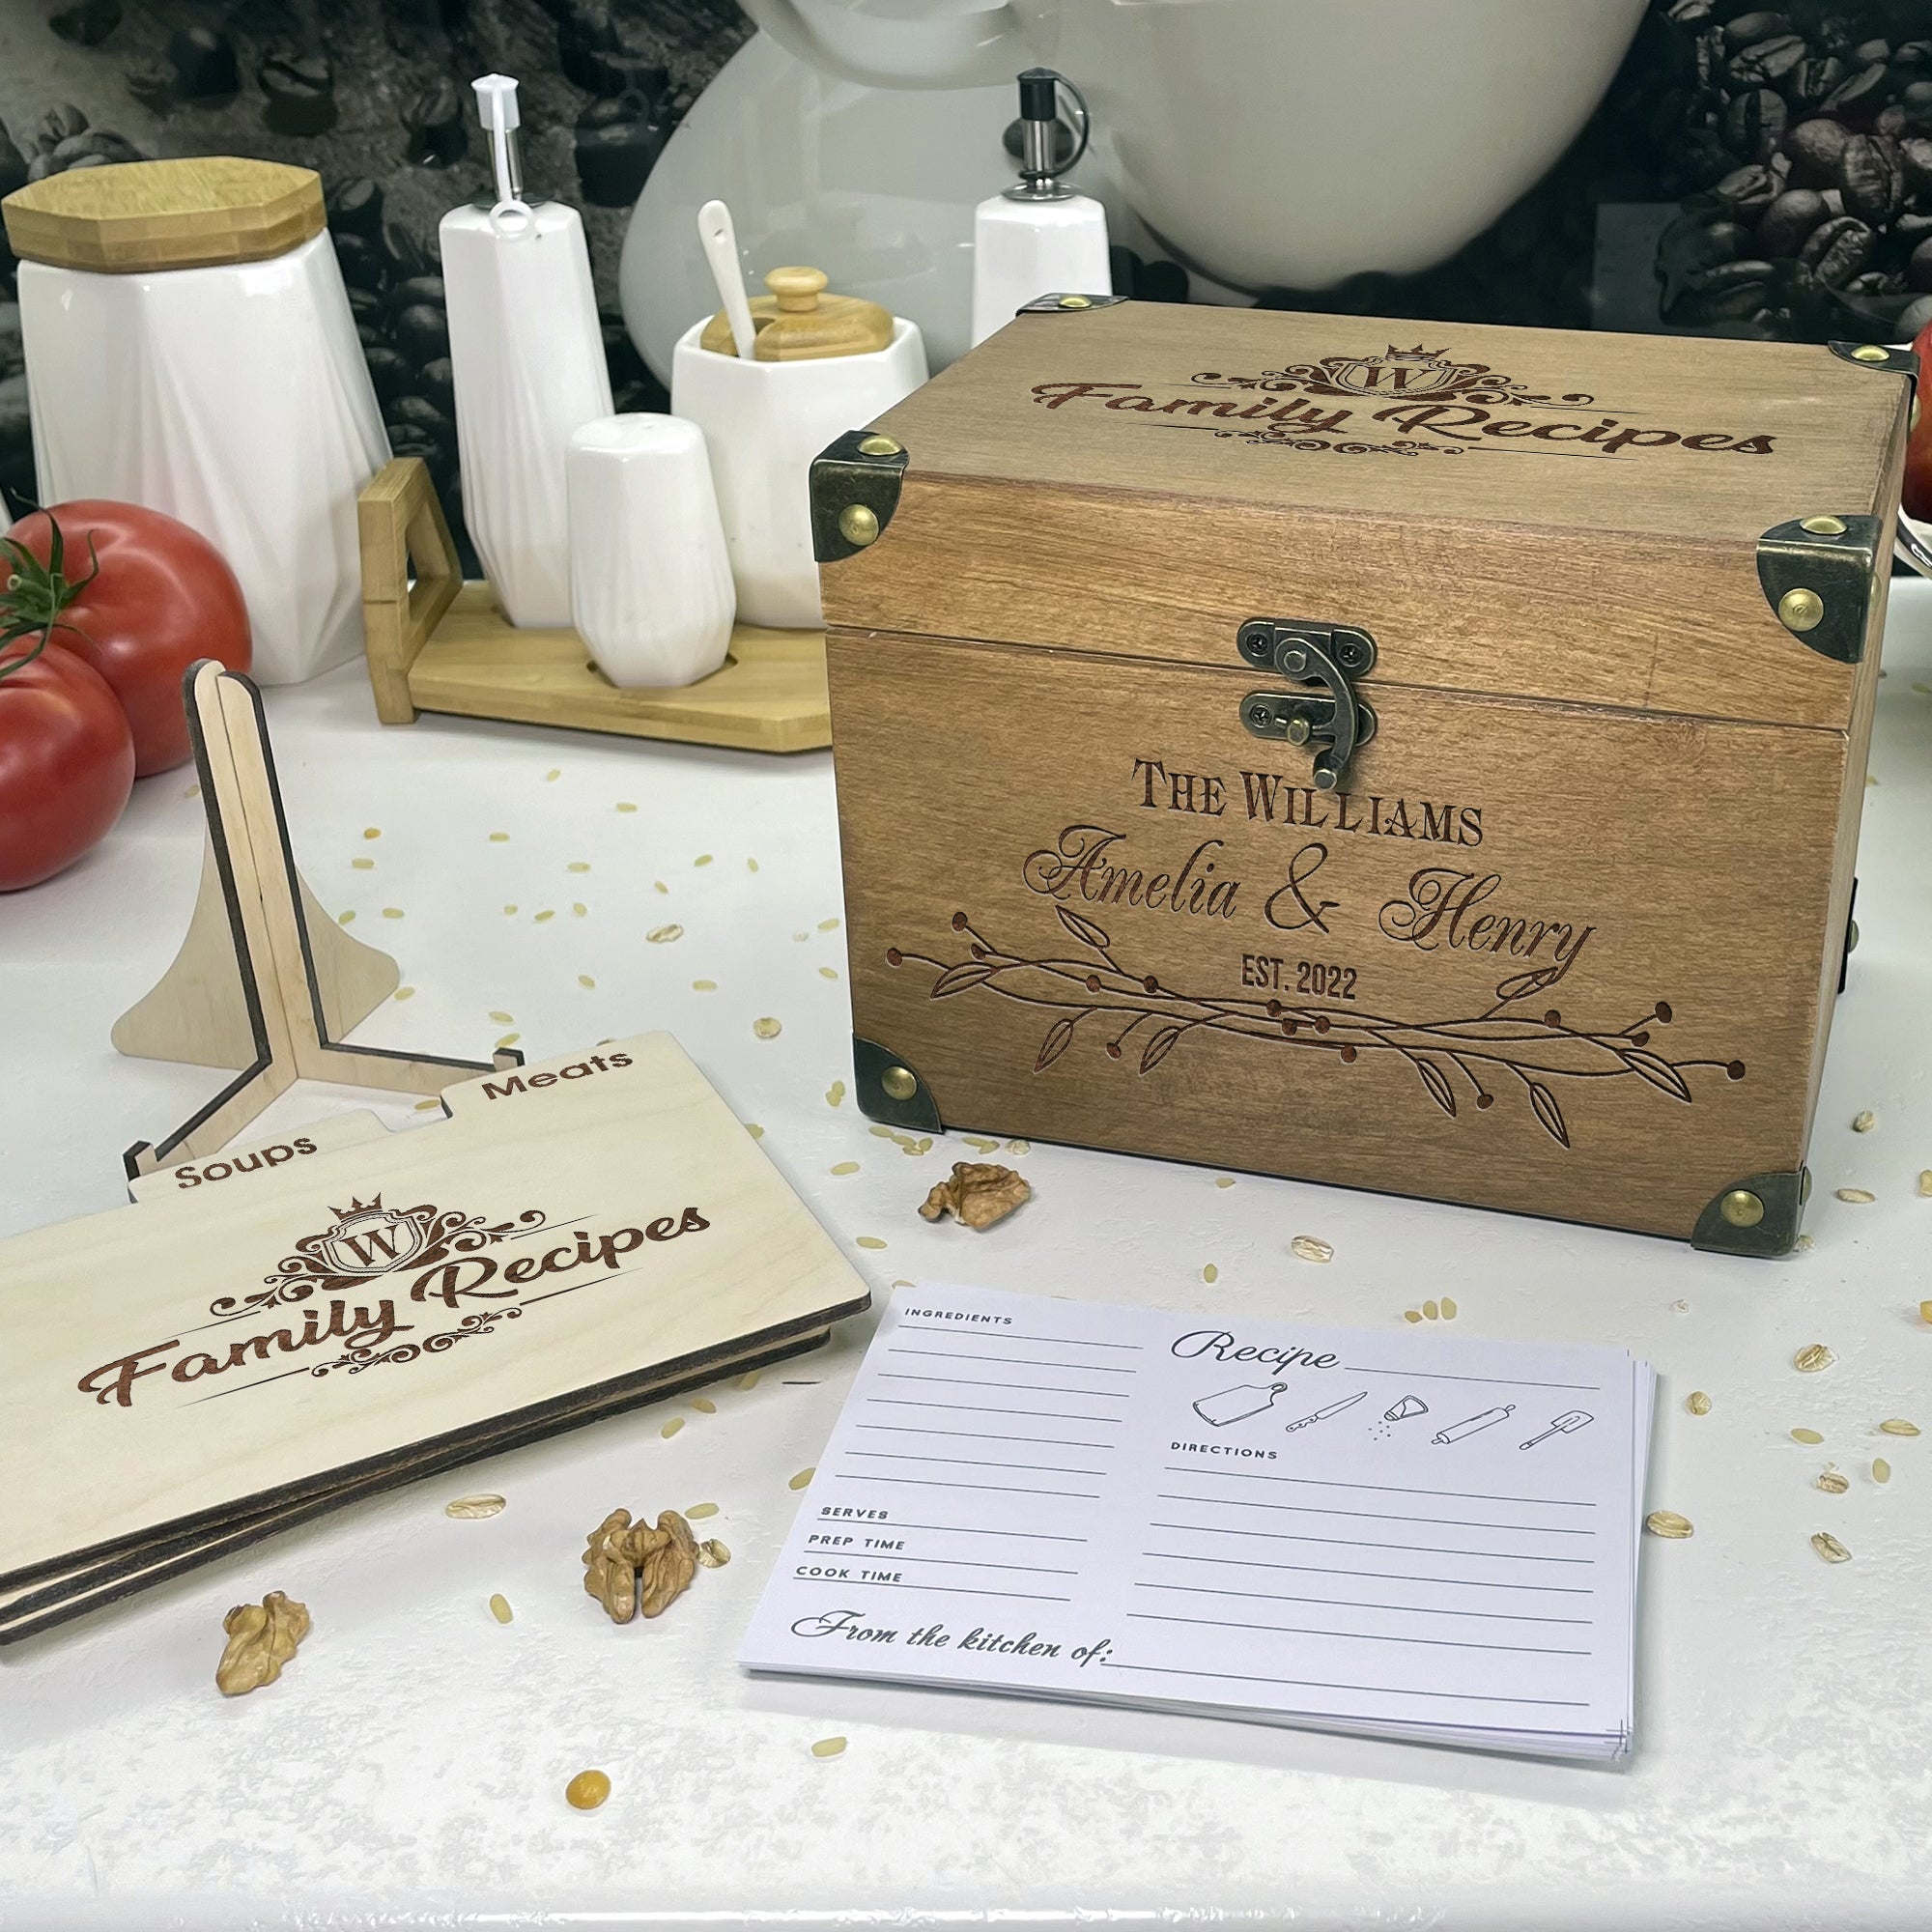 Personalized Recipe Box with Dividers and Cards Family Recipes engraving